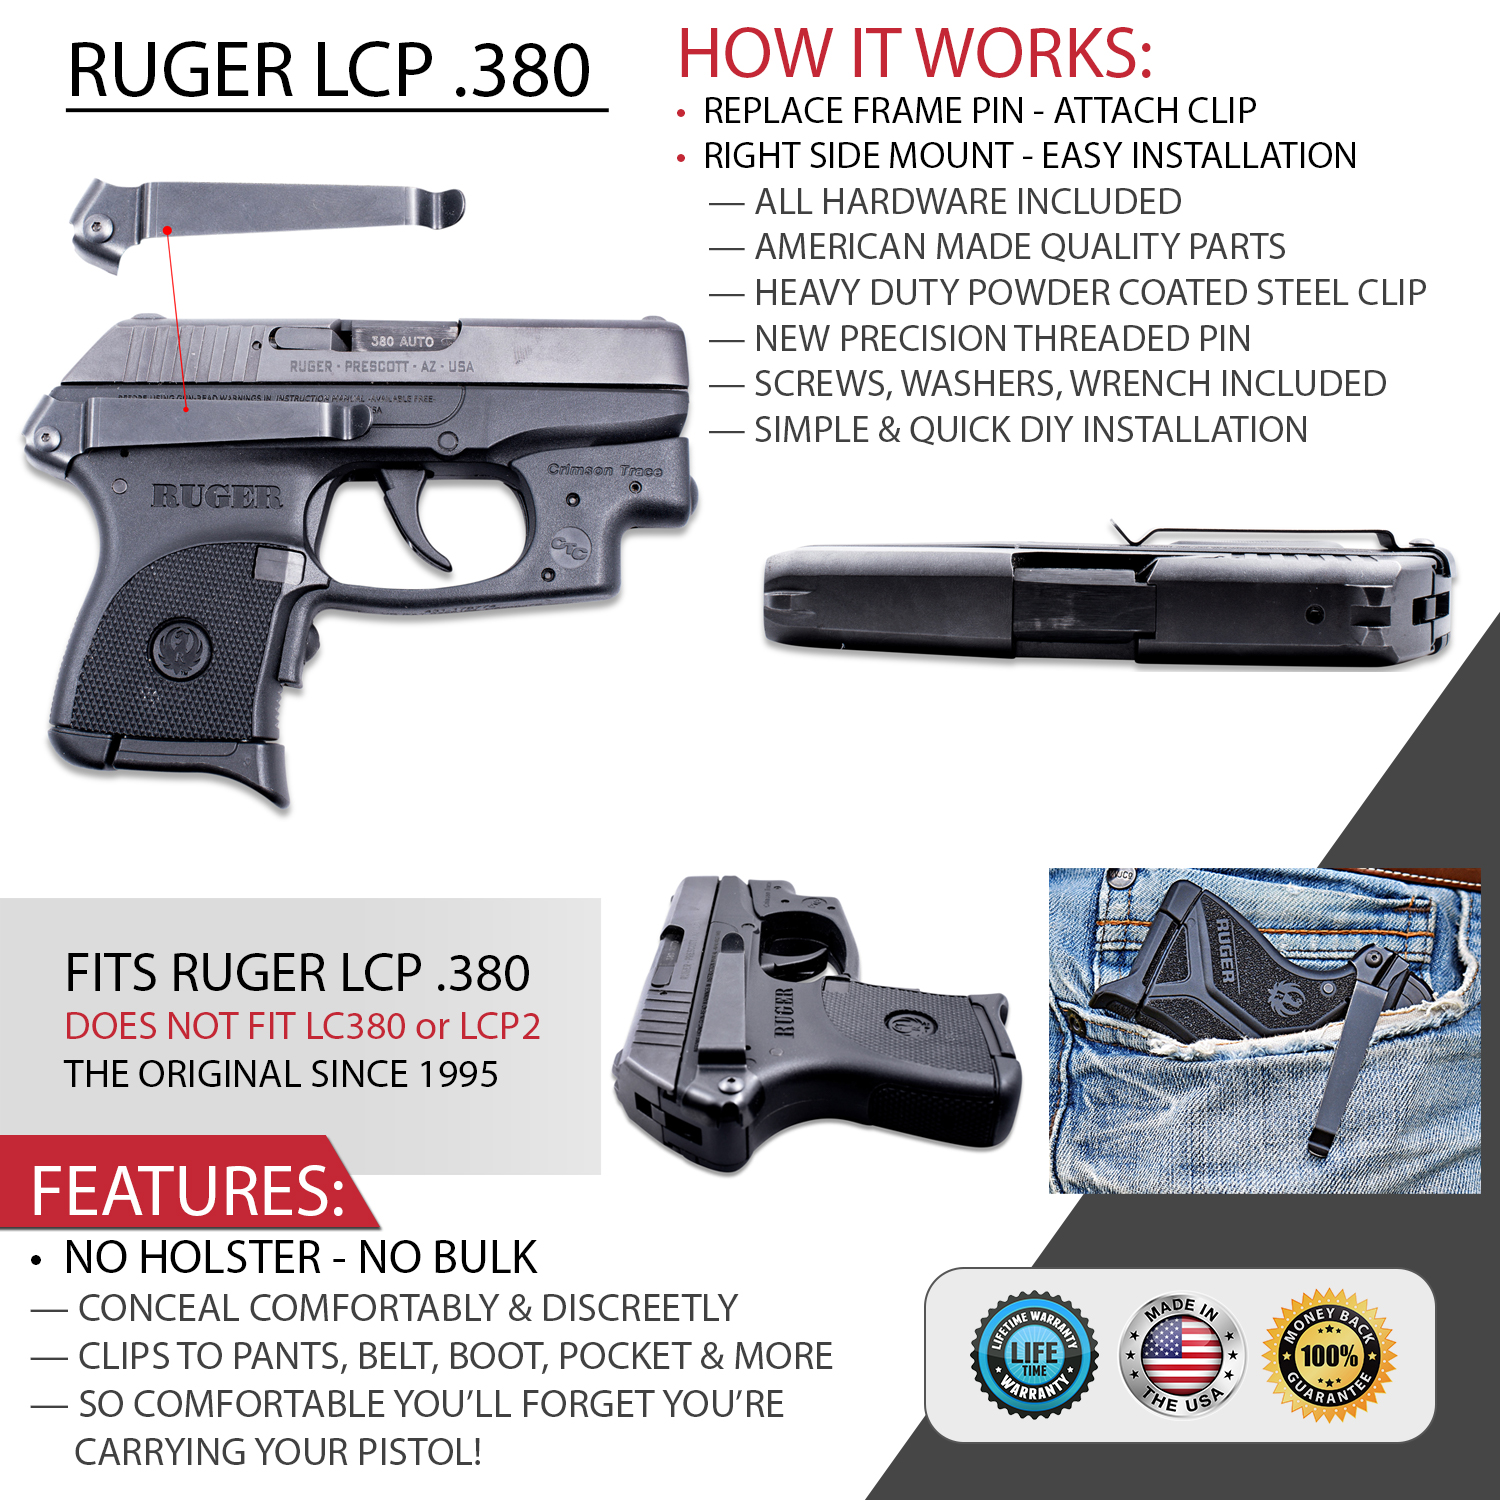 The Ultimate Concealed Carry Belt Clip Gun Holster For Ruger LCP-380 